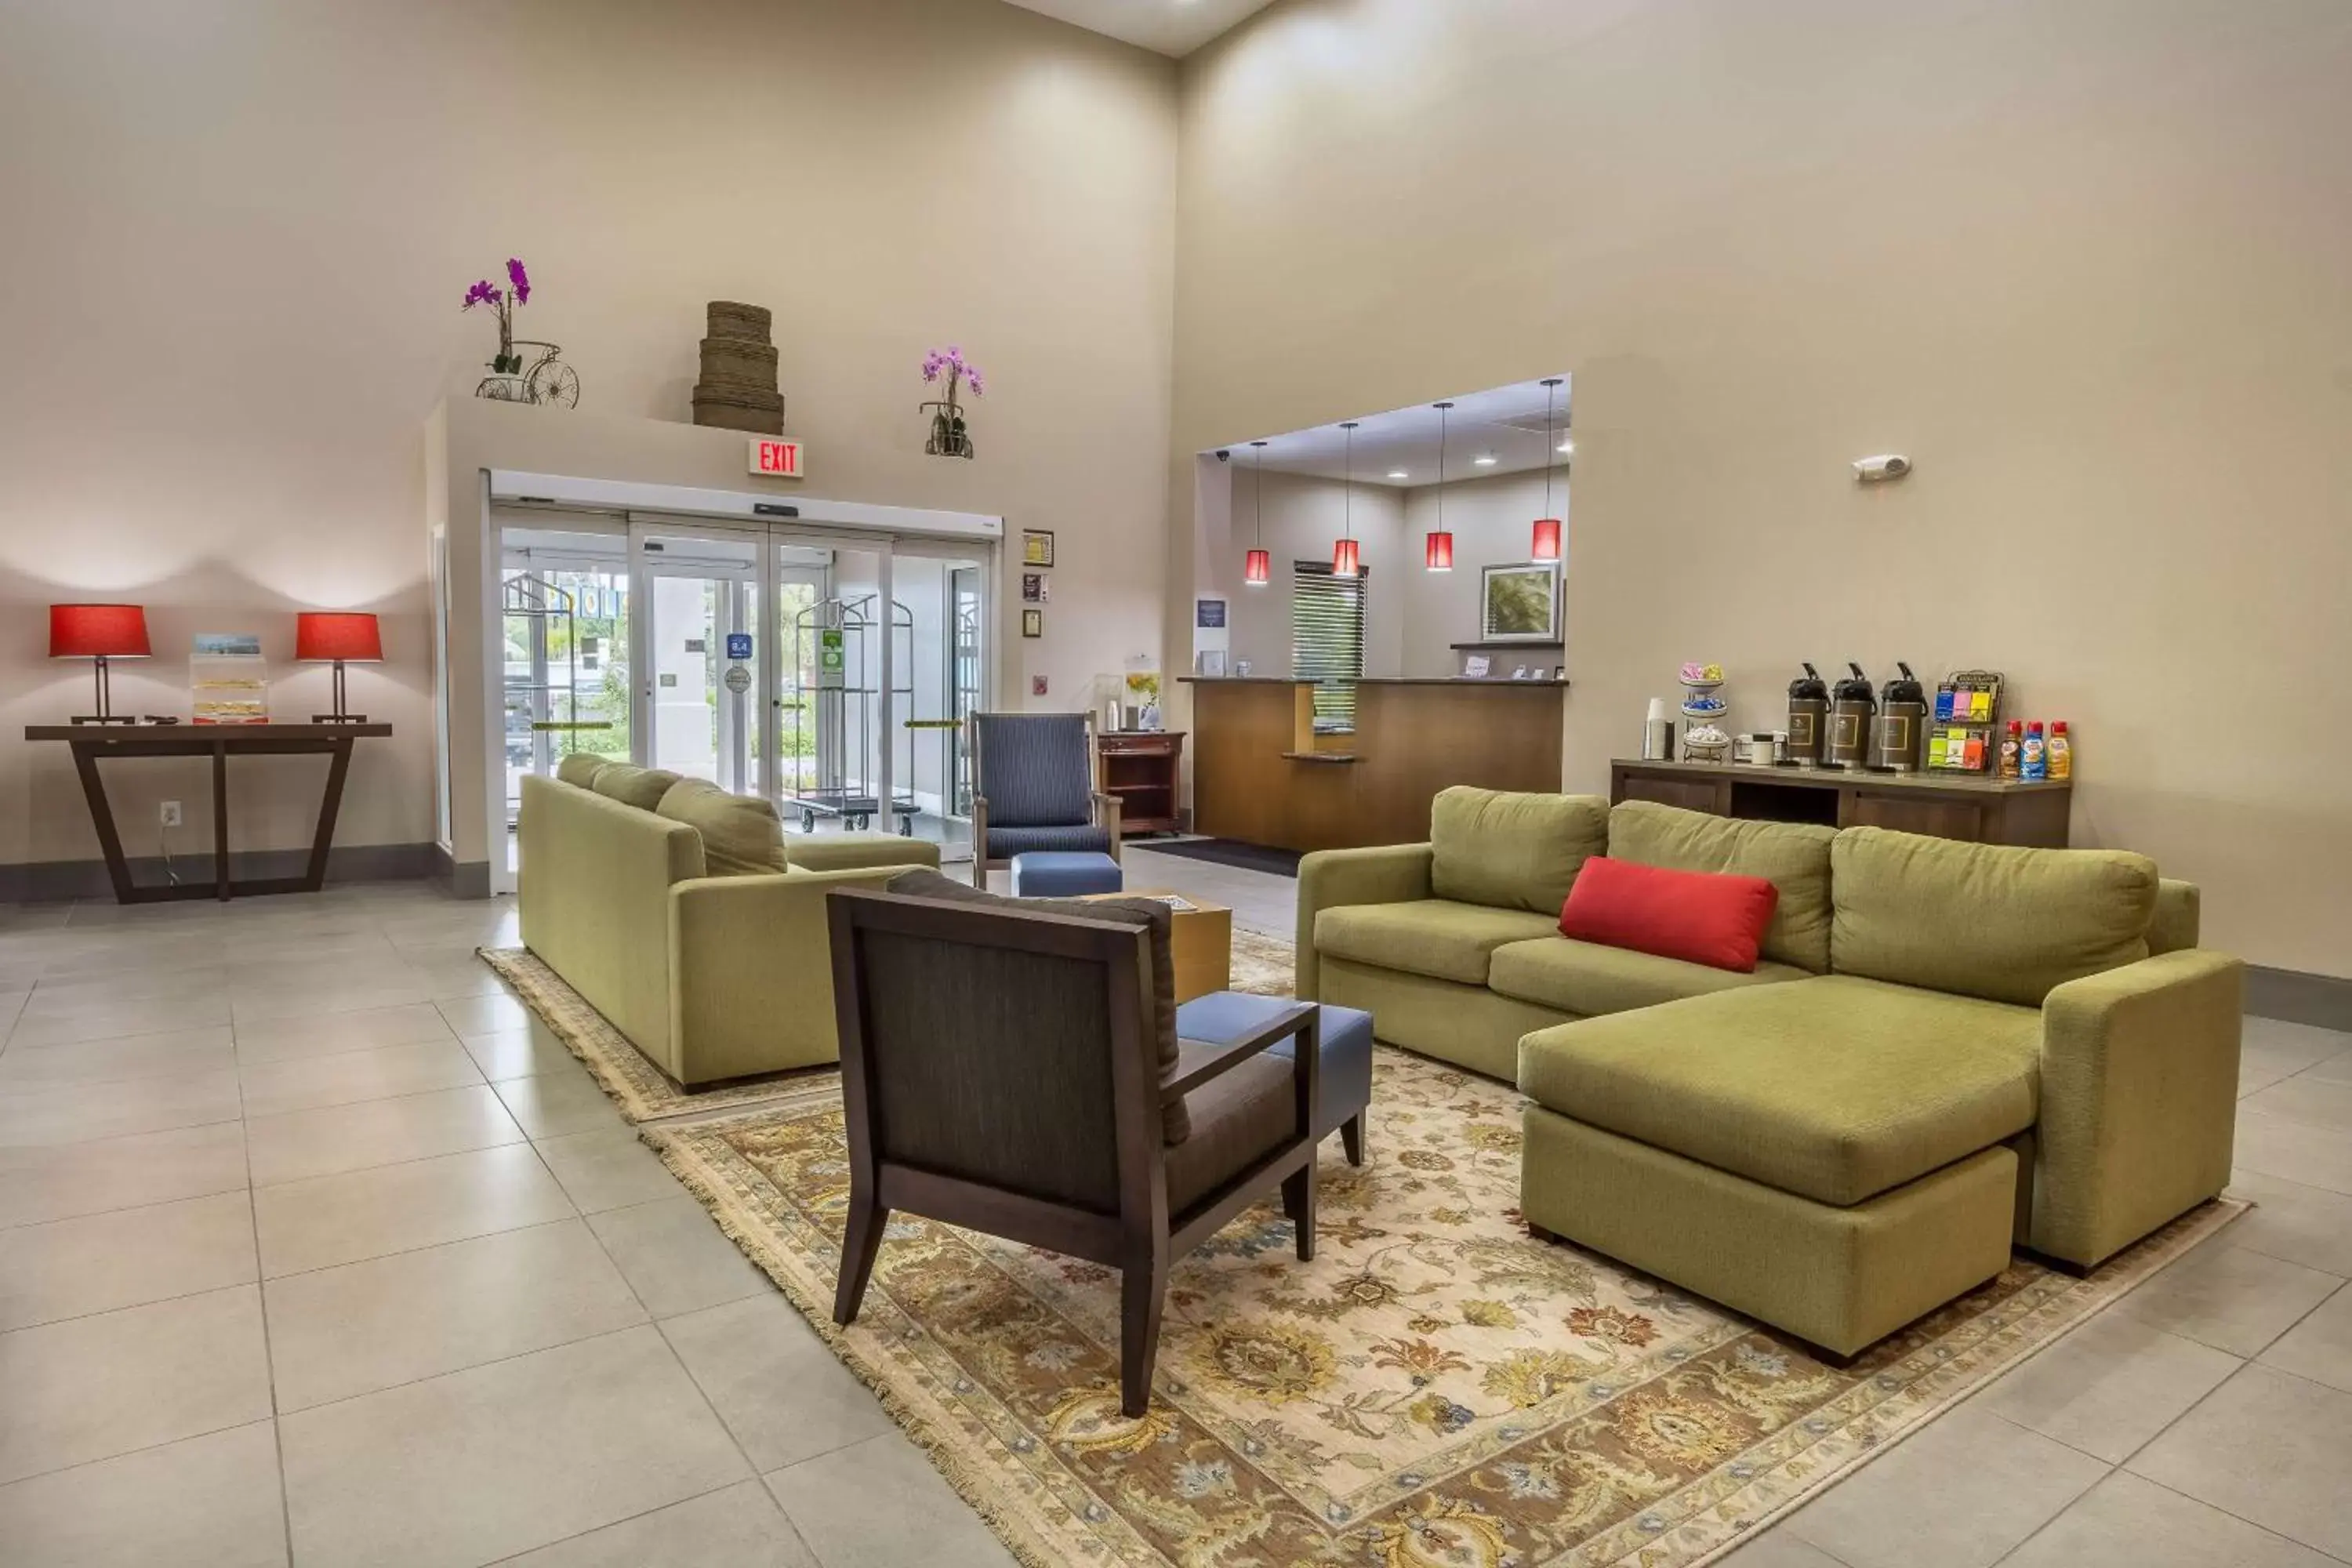 Lobby or reception in Country Inn & Suites by Radisson, St. Petersburg - Clearwater, FL